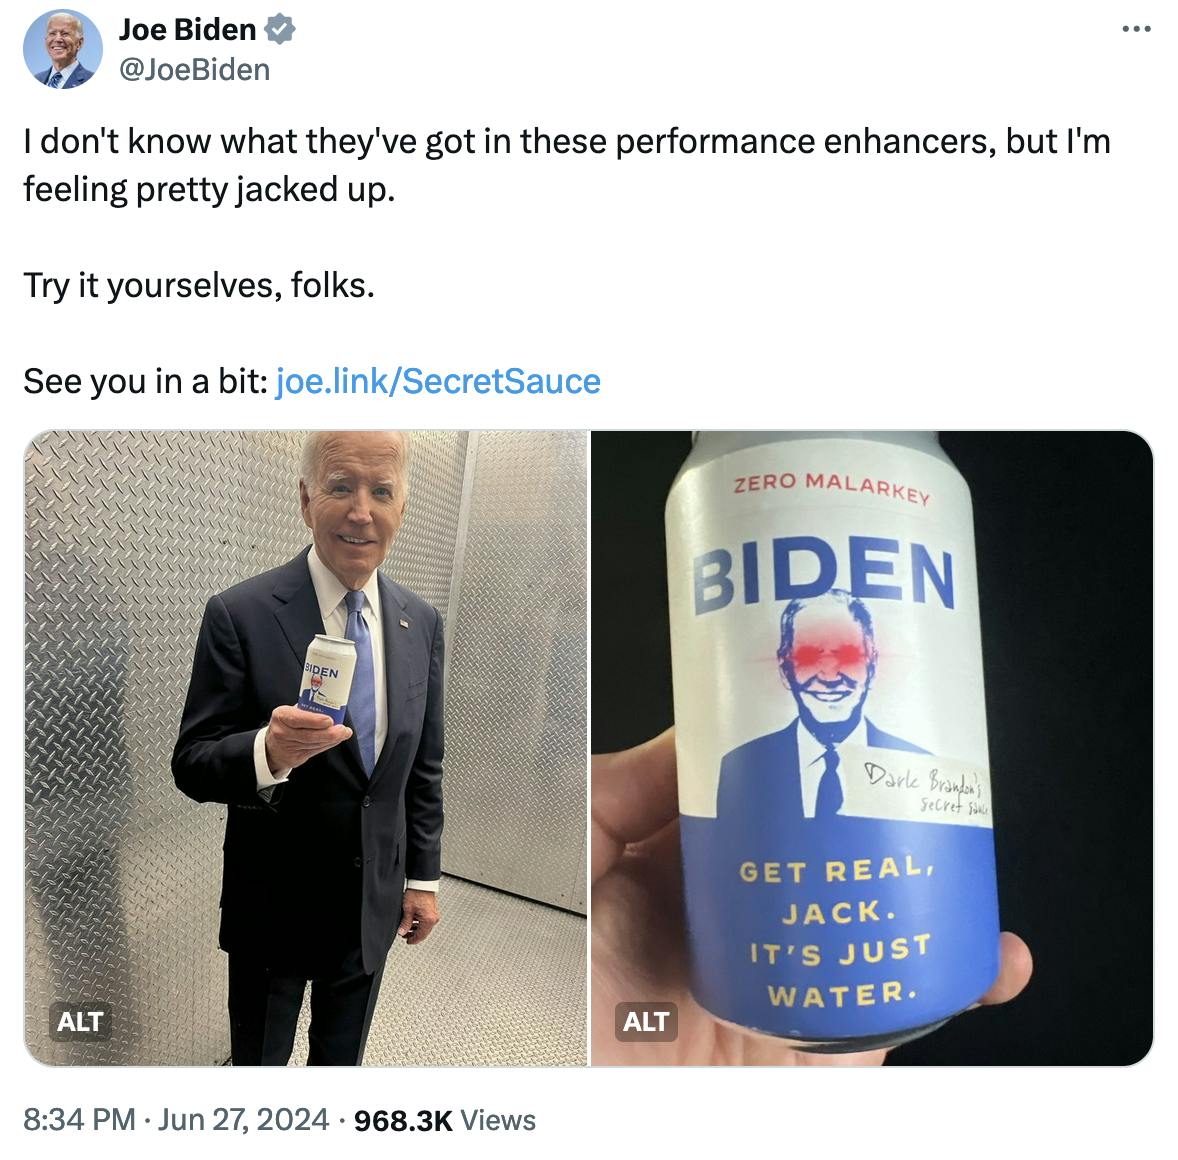 @JoeBiden I don't know what they've got in these performance enhancers, but I'm feeling pretty jacked up. Try it yourselves, folks. See you in a bit: http://joe.link/SecretSauce